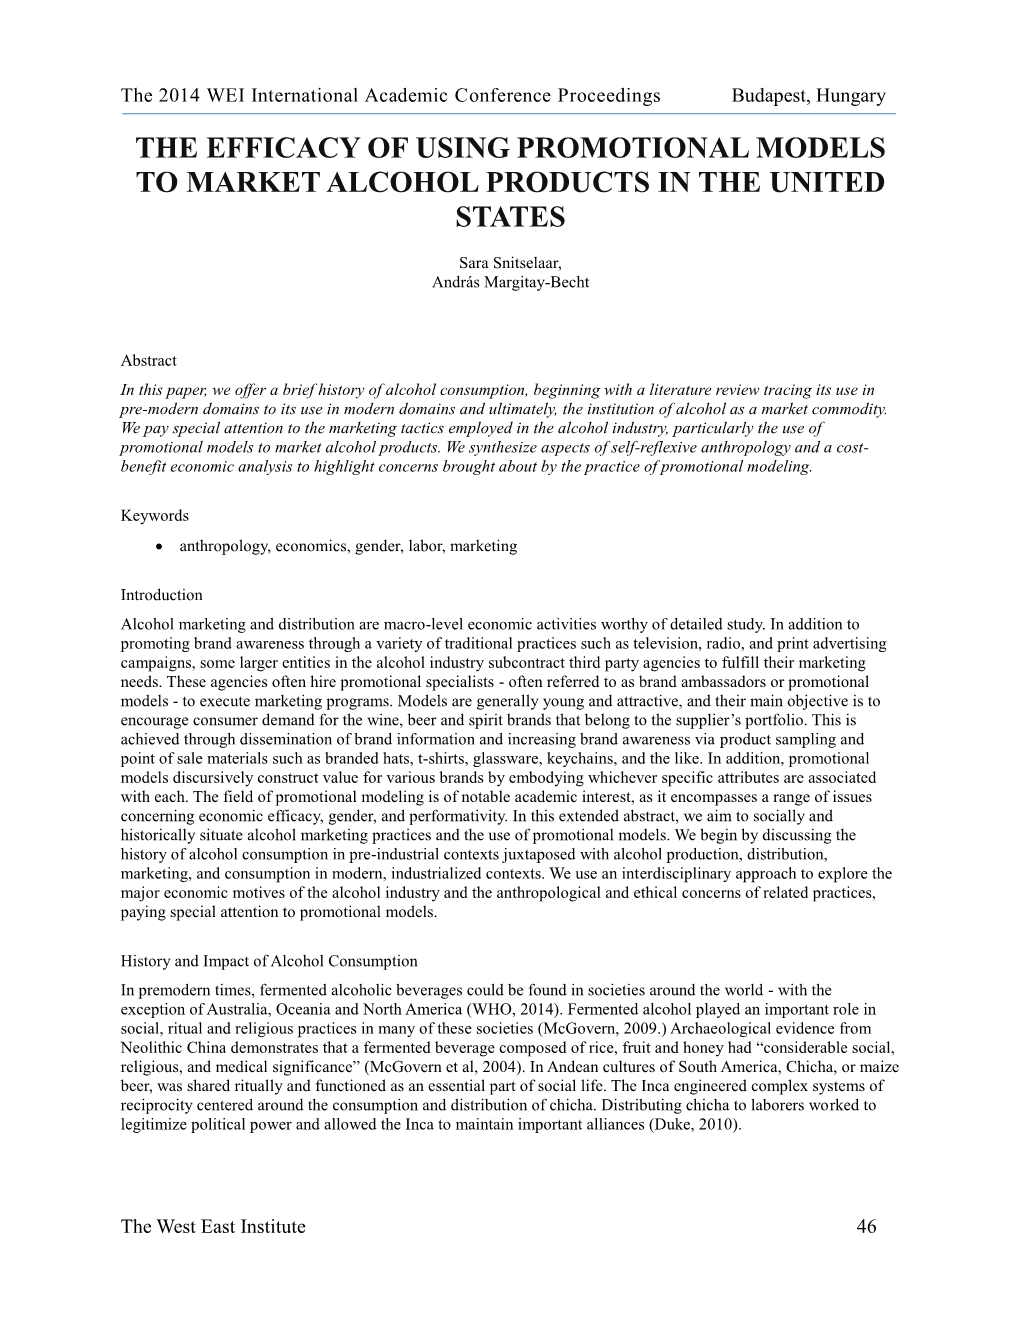 The Efficacy of Using Promotional Models to Market Alcohol Products in the United States